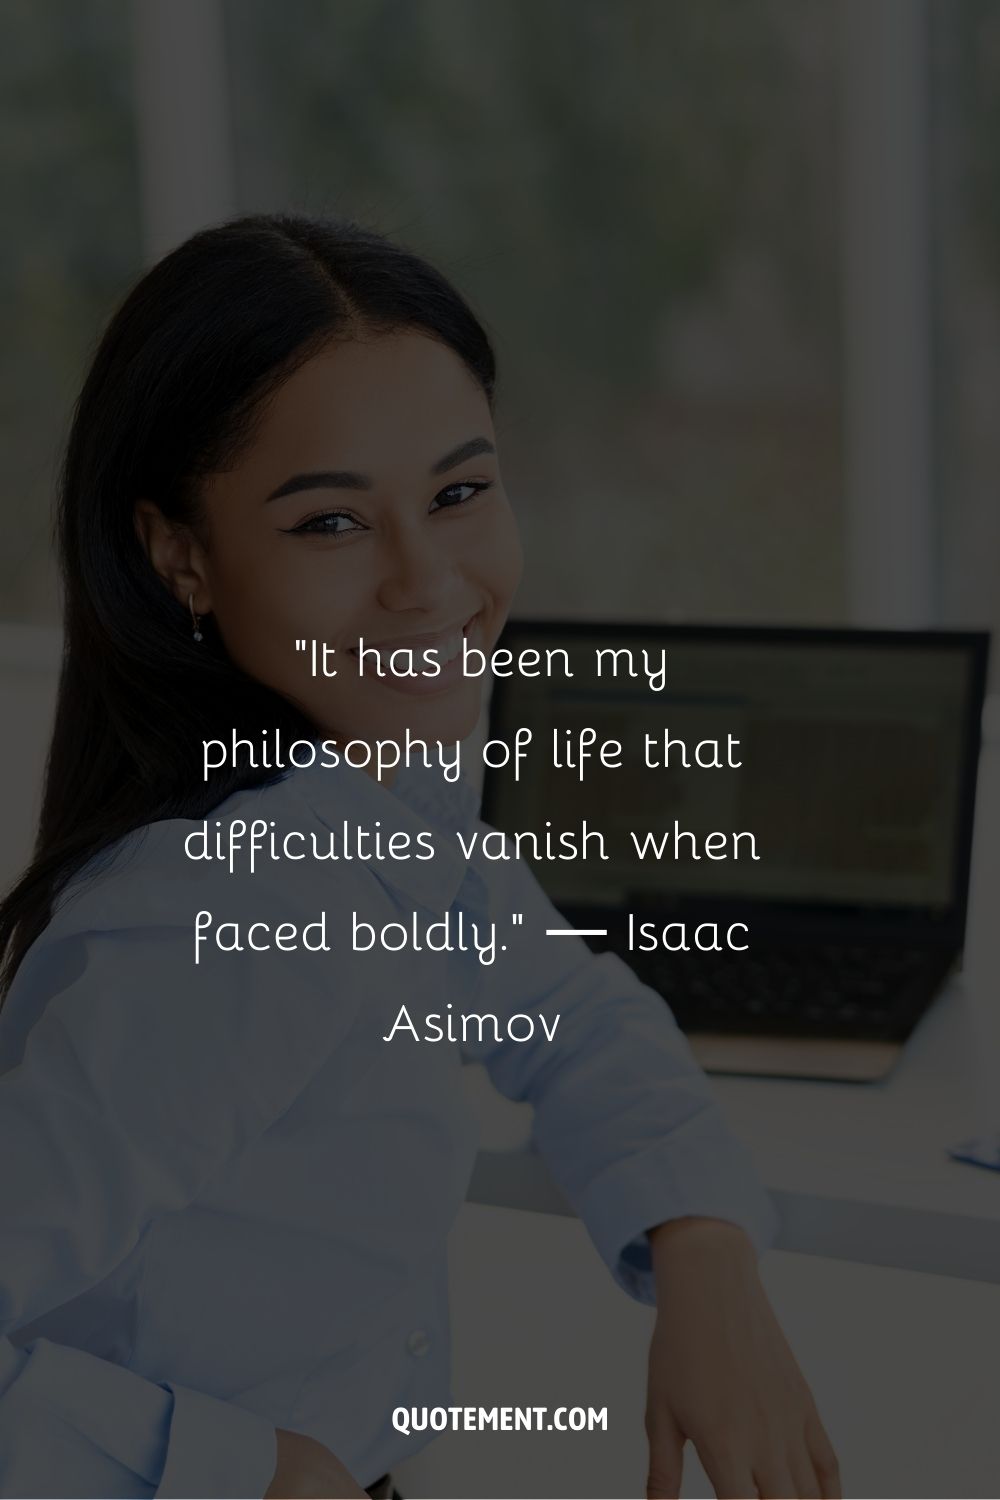 “It has been my philosophy of life that difficulties vanish when faced boldly.” ― Isaac Asimov